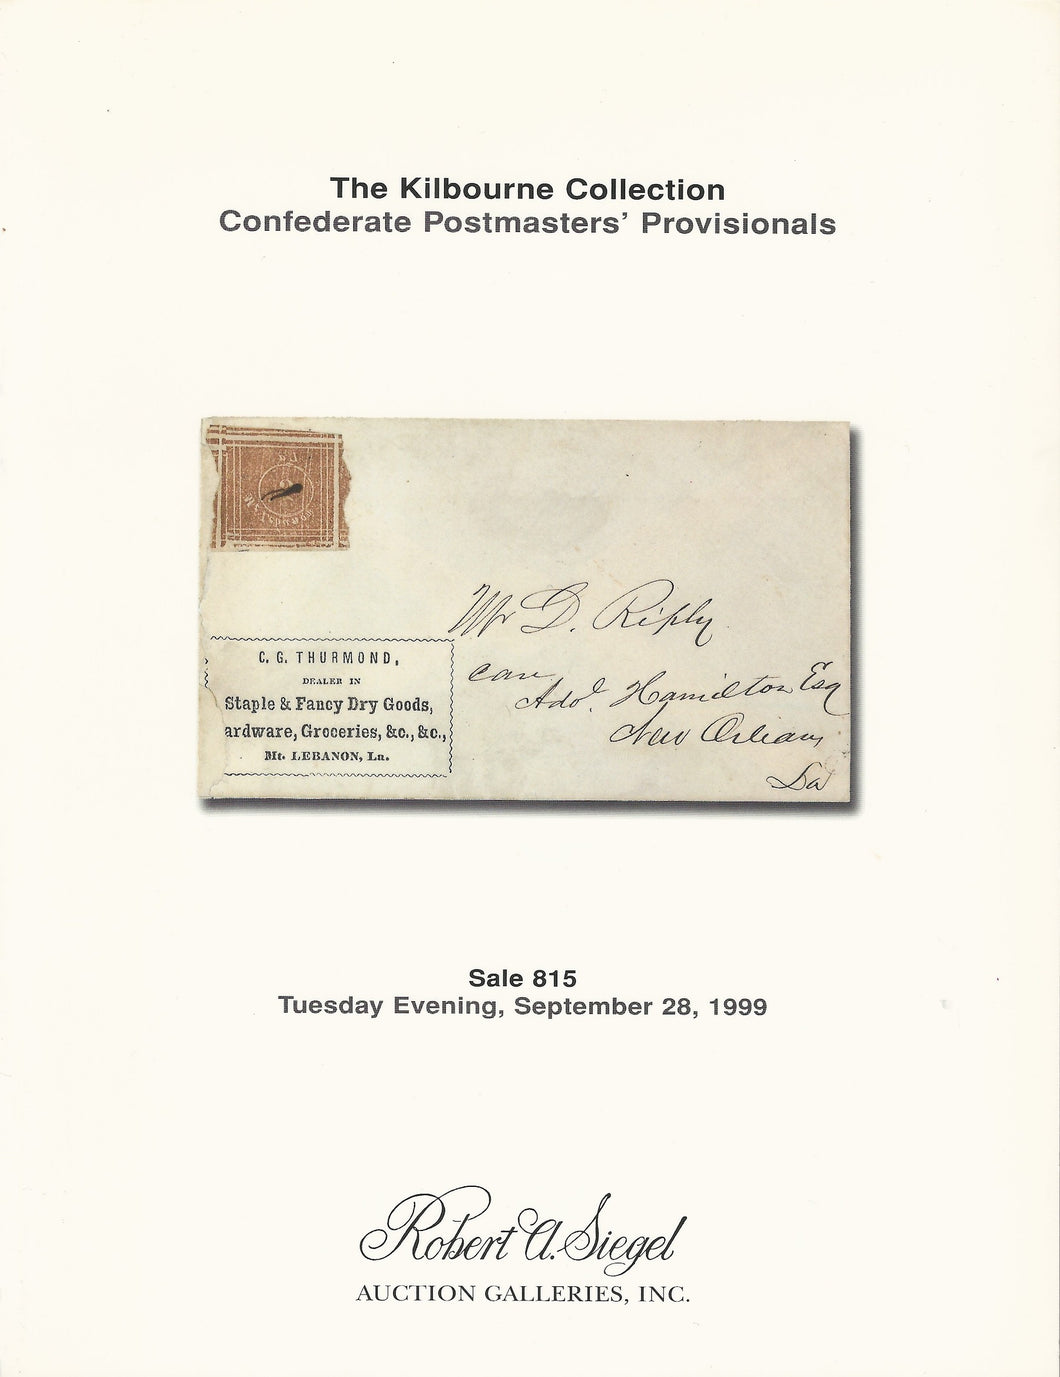 The Kilbourne Collection of Confederate Postmasters Provisionals, Robert A. Siegel Auction Galleries, Sale 815, Sept. 28, 1999